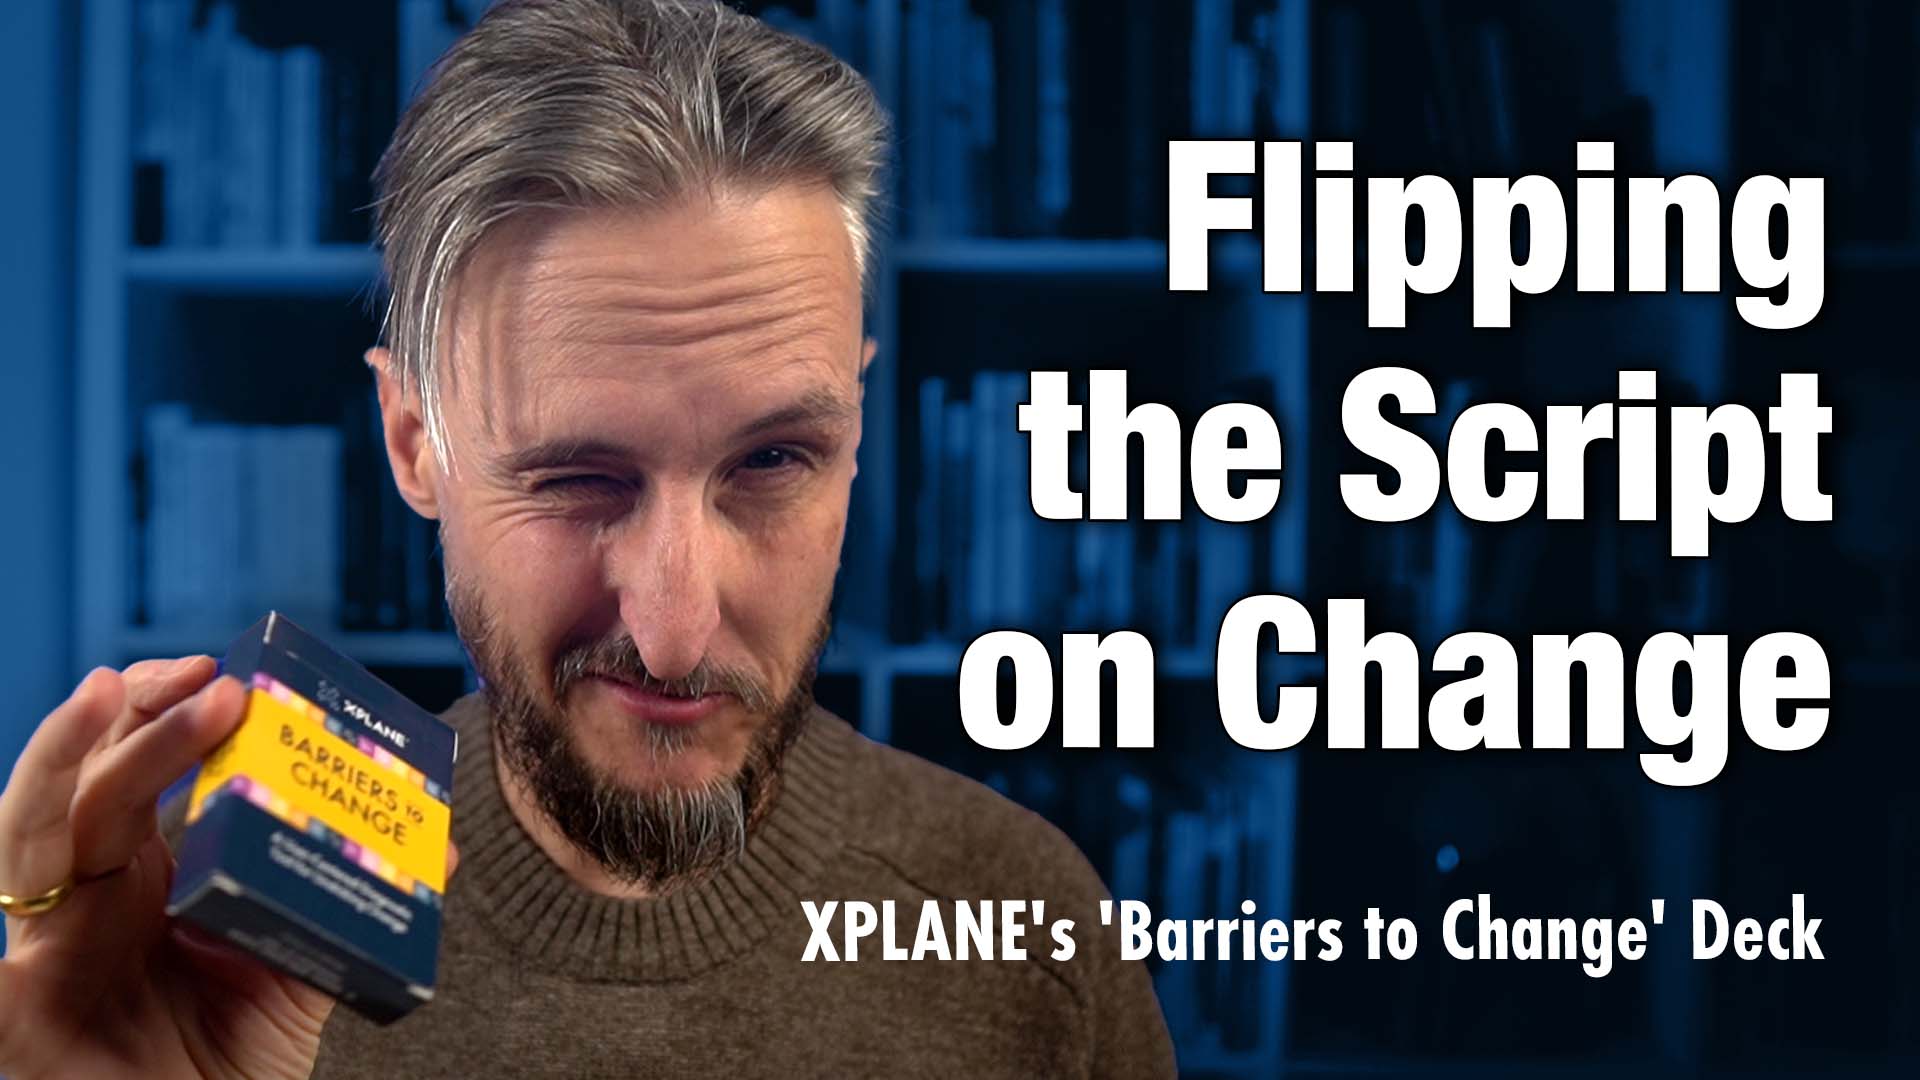 XPLANE’s ‘Barriers to Change’ Deck: Flipping the Script [and cards] on Change